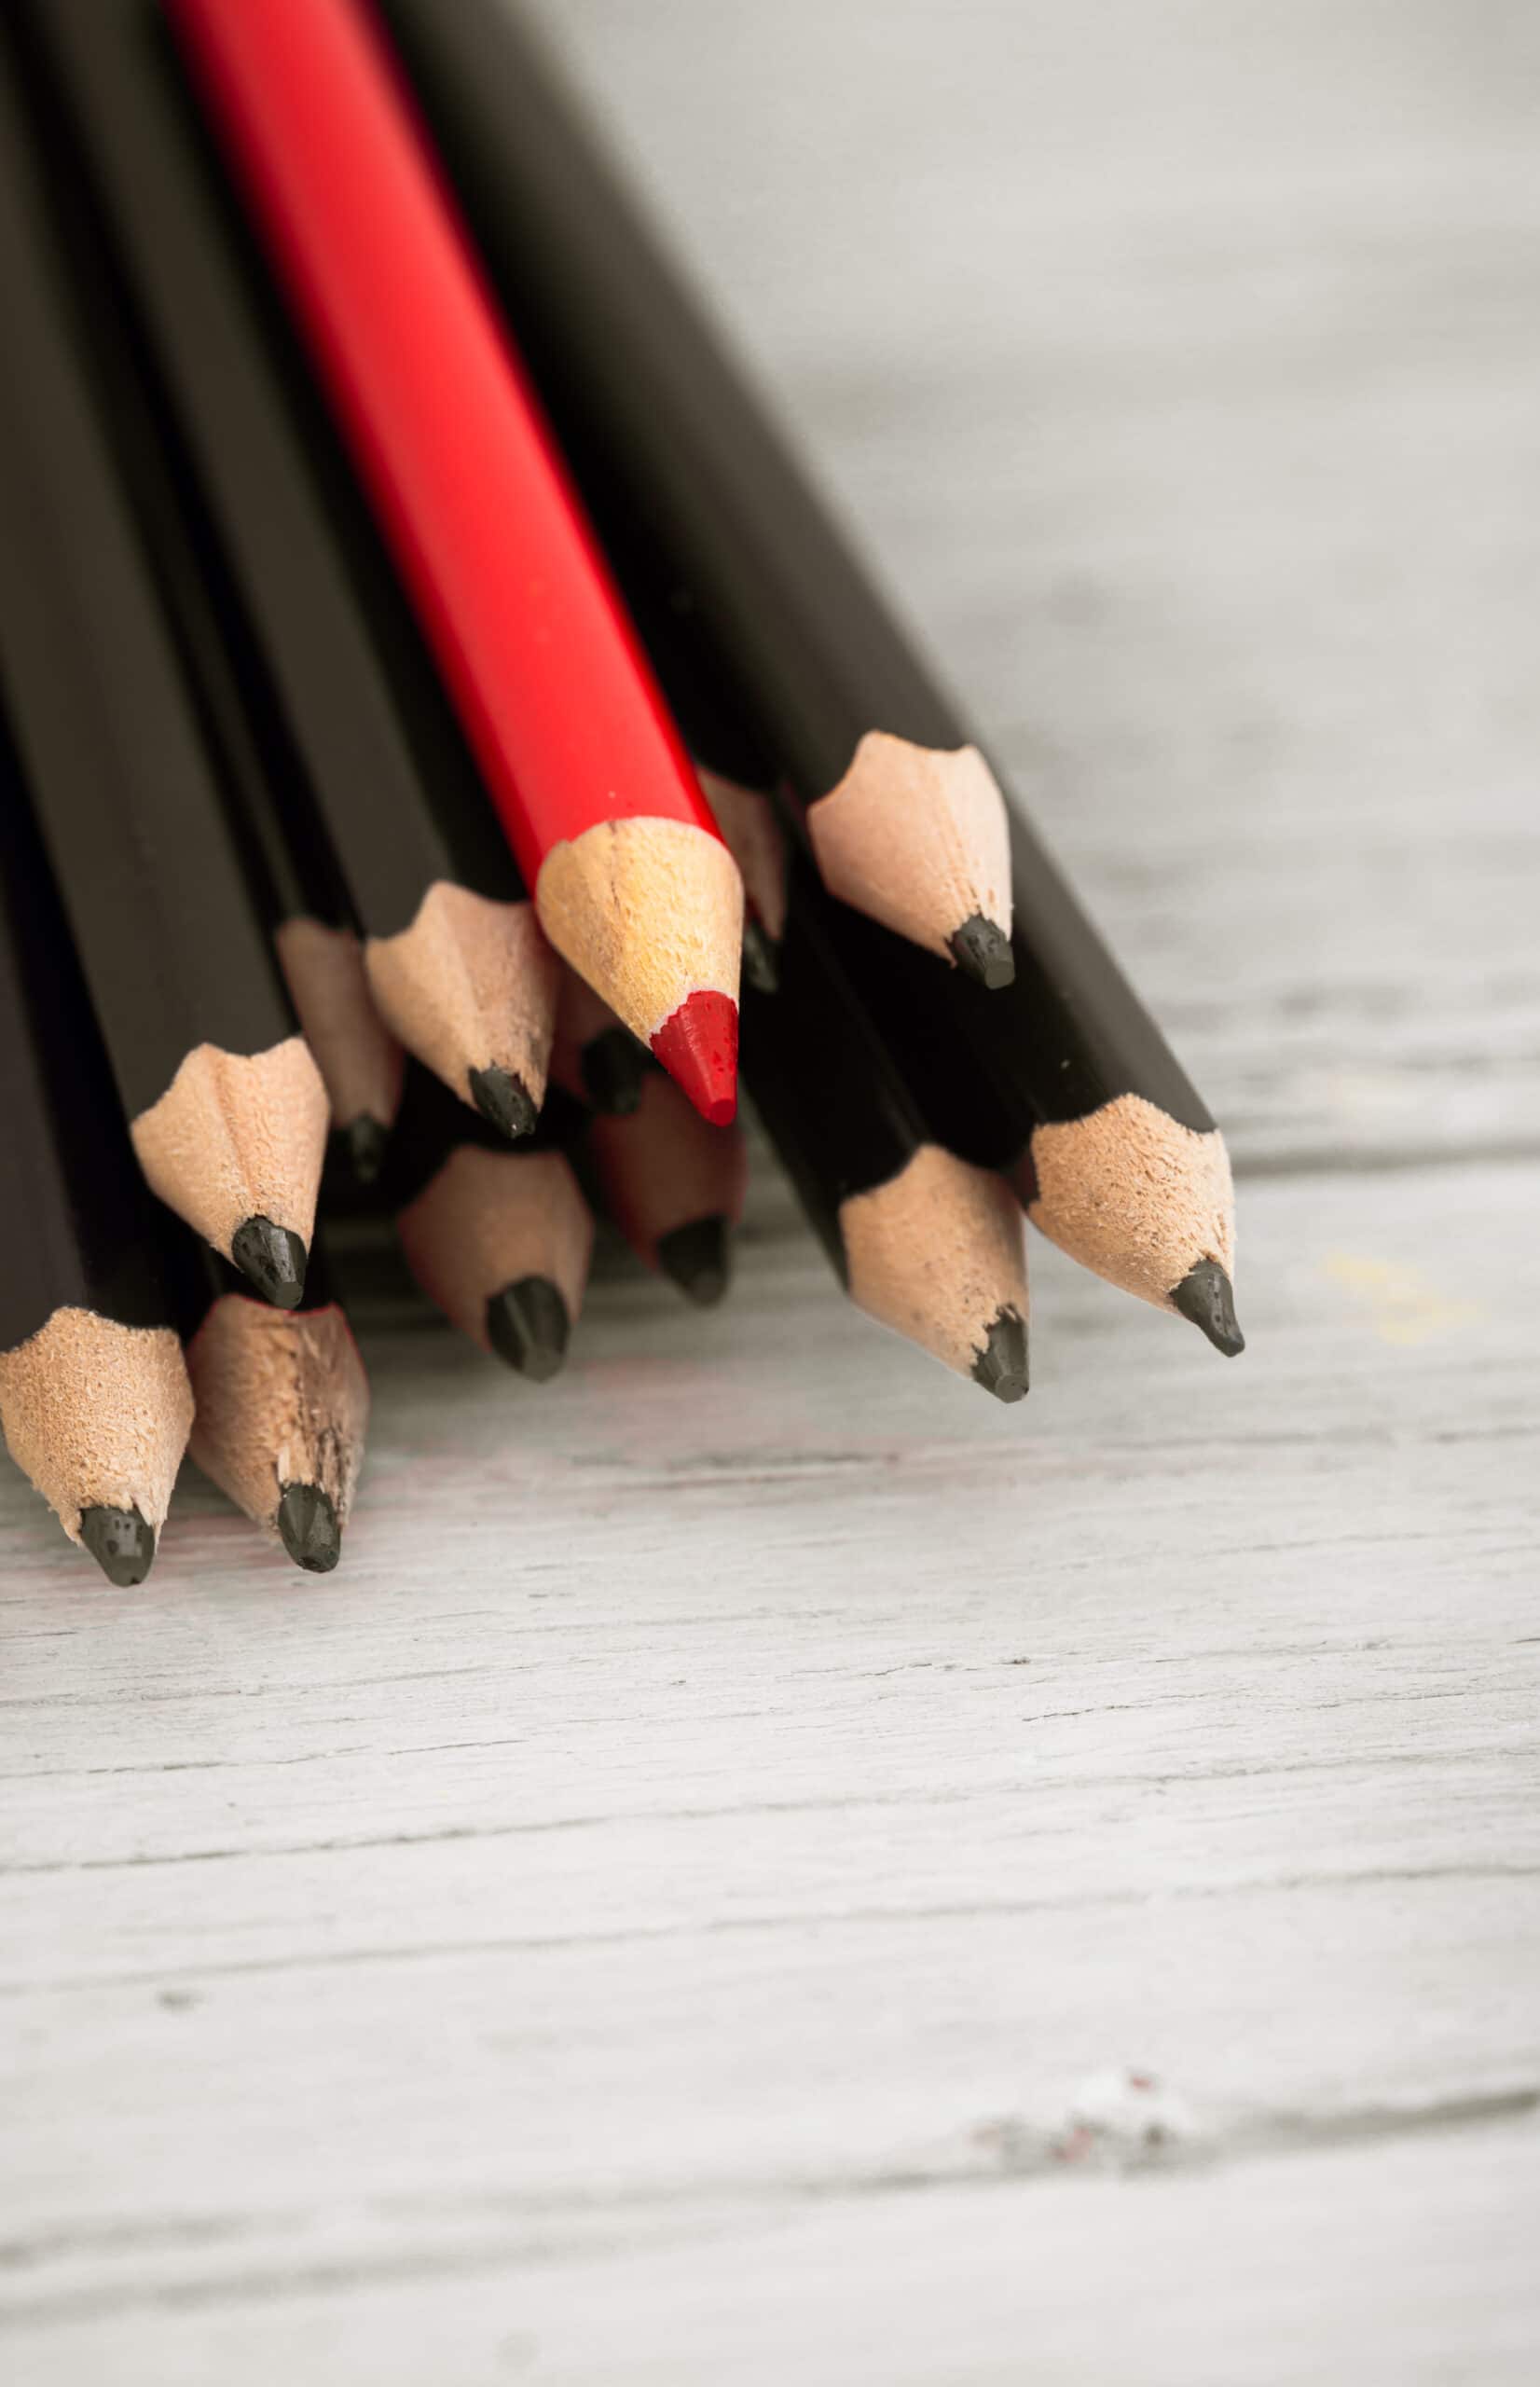 Red pencil stands out from the crowd of black on a wooden white background.